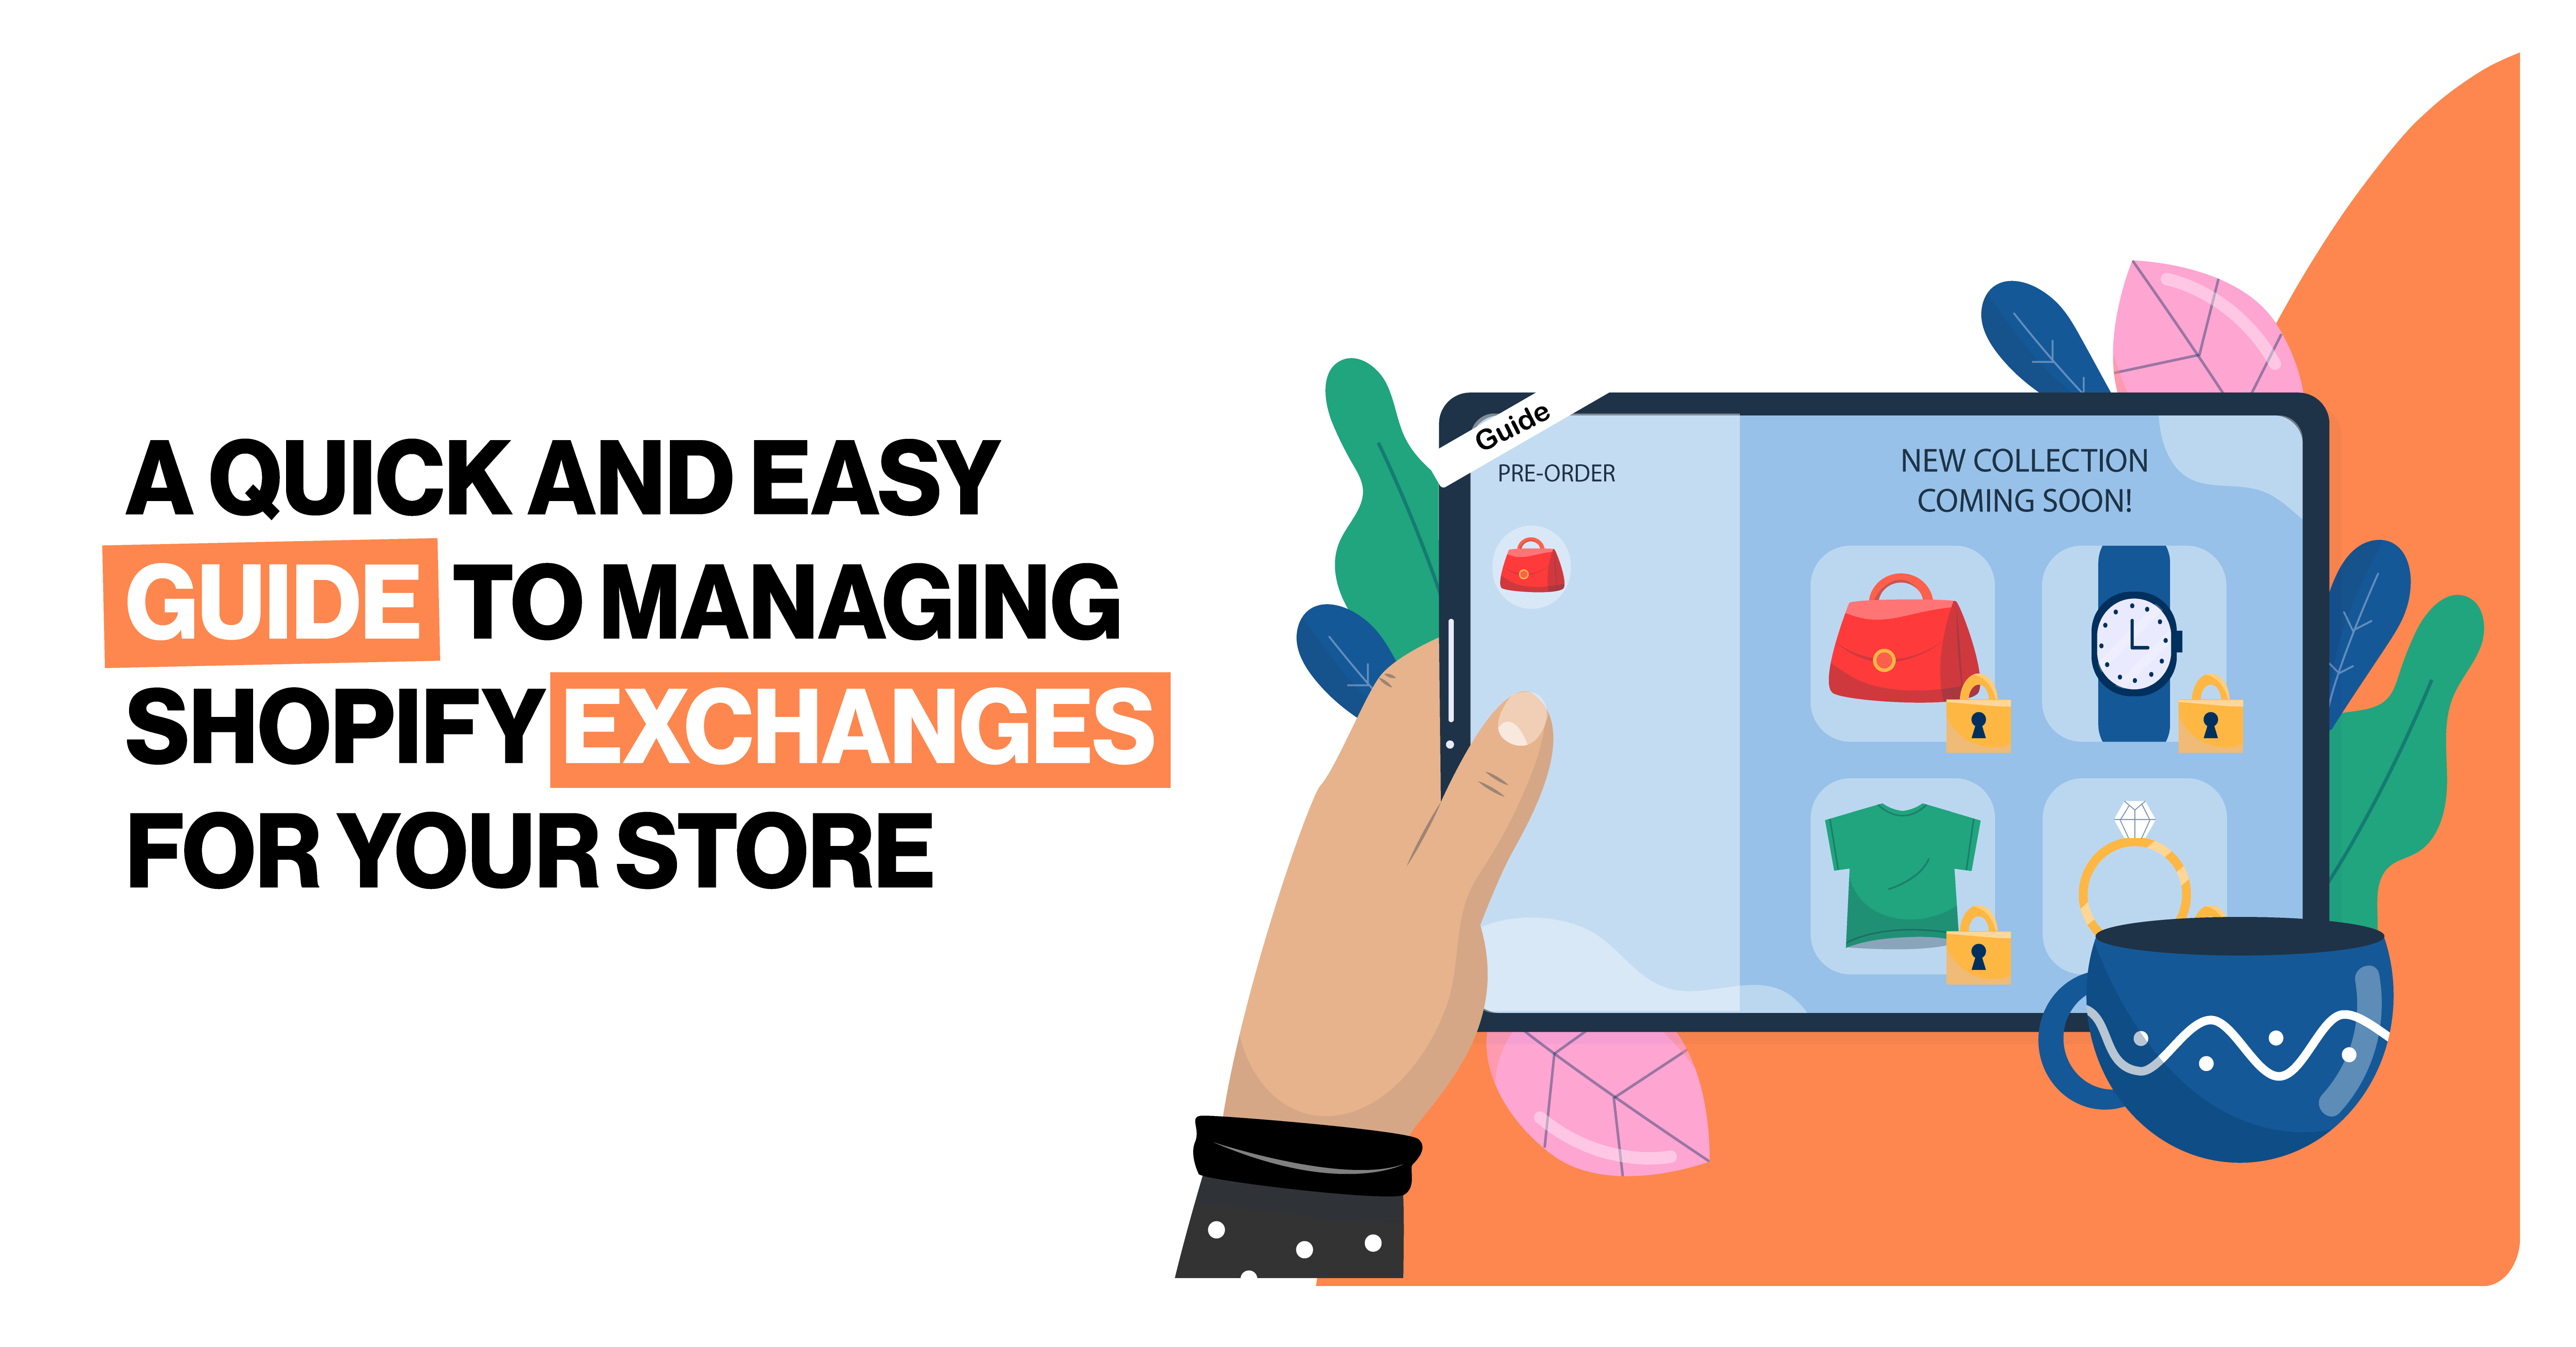 A Quick and Easy Guide to Managing Shopify Exchanges for Your Store